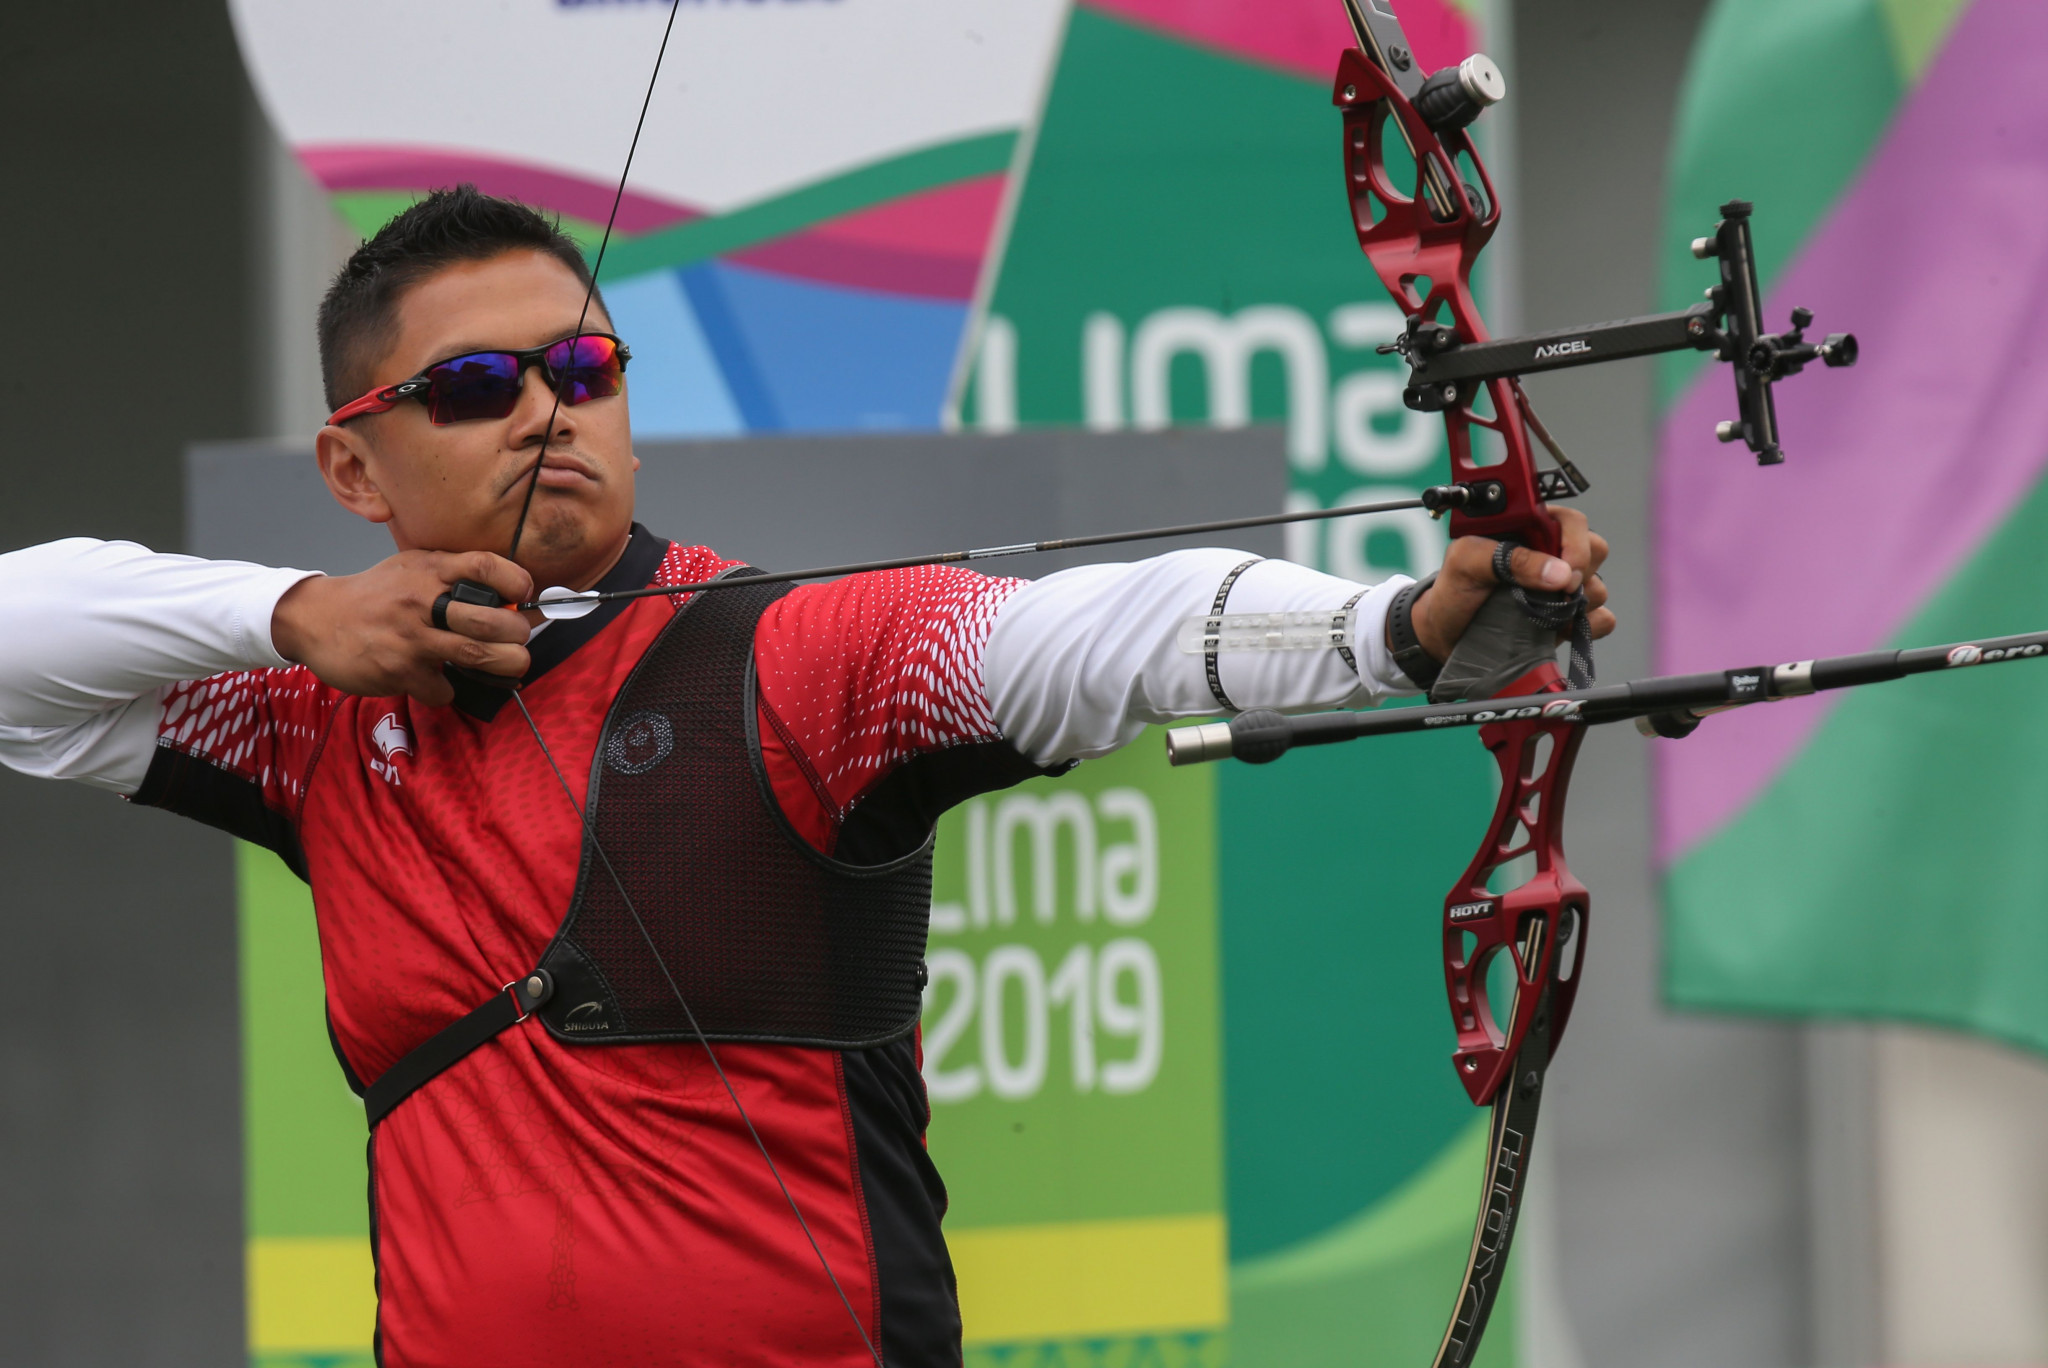 World Archery confirm 35 athletes to receive grants from COVID-19 fund